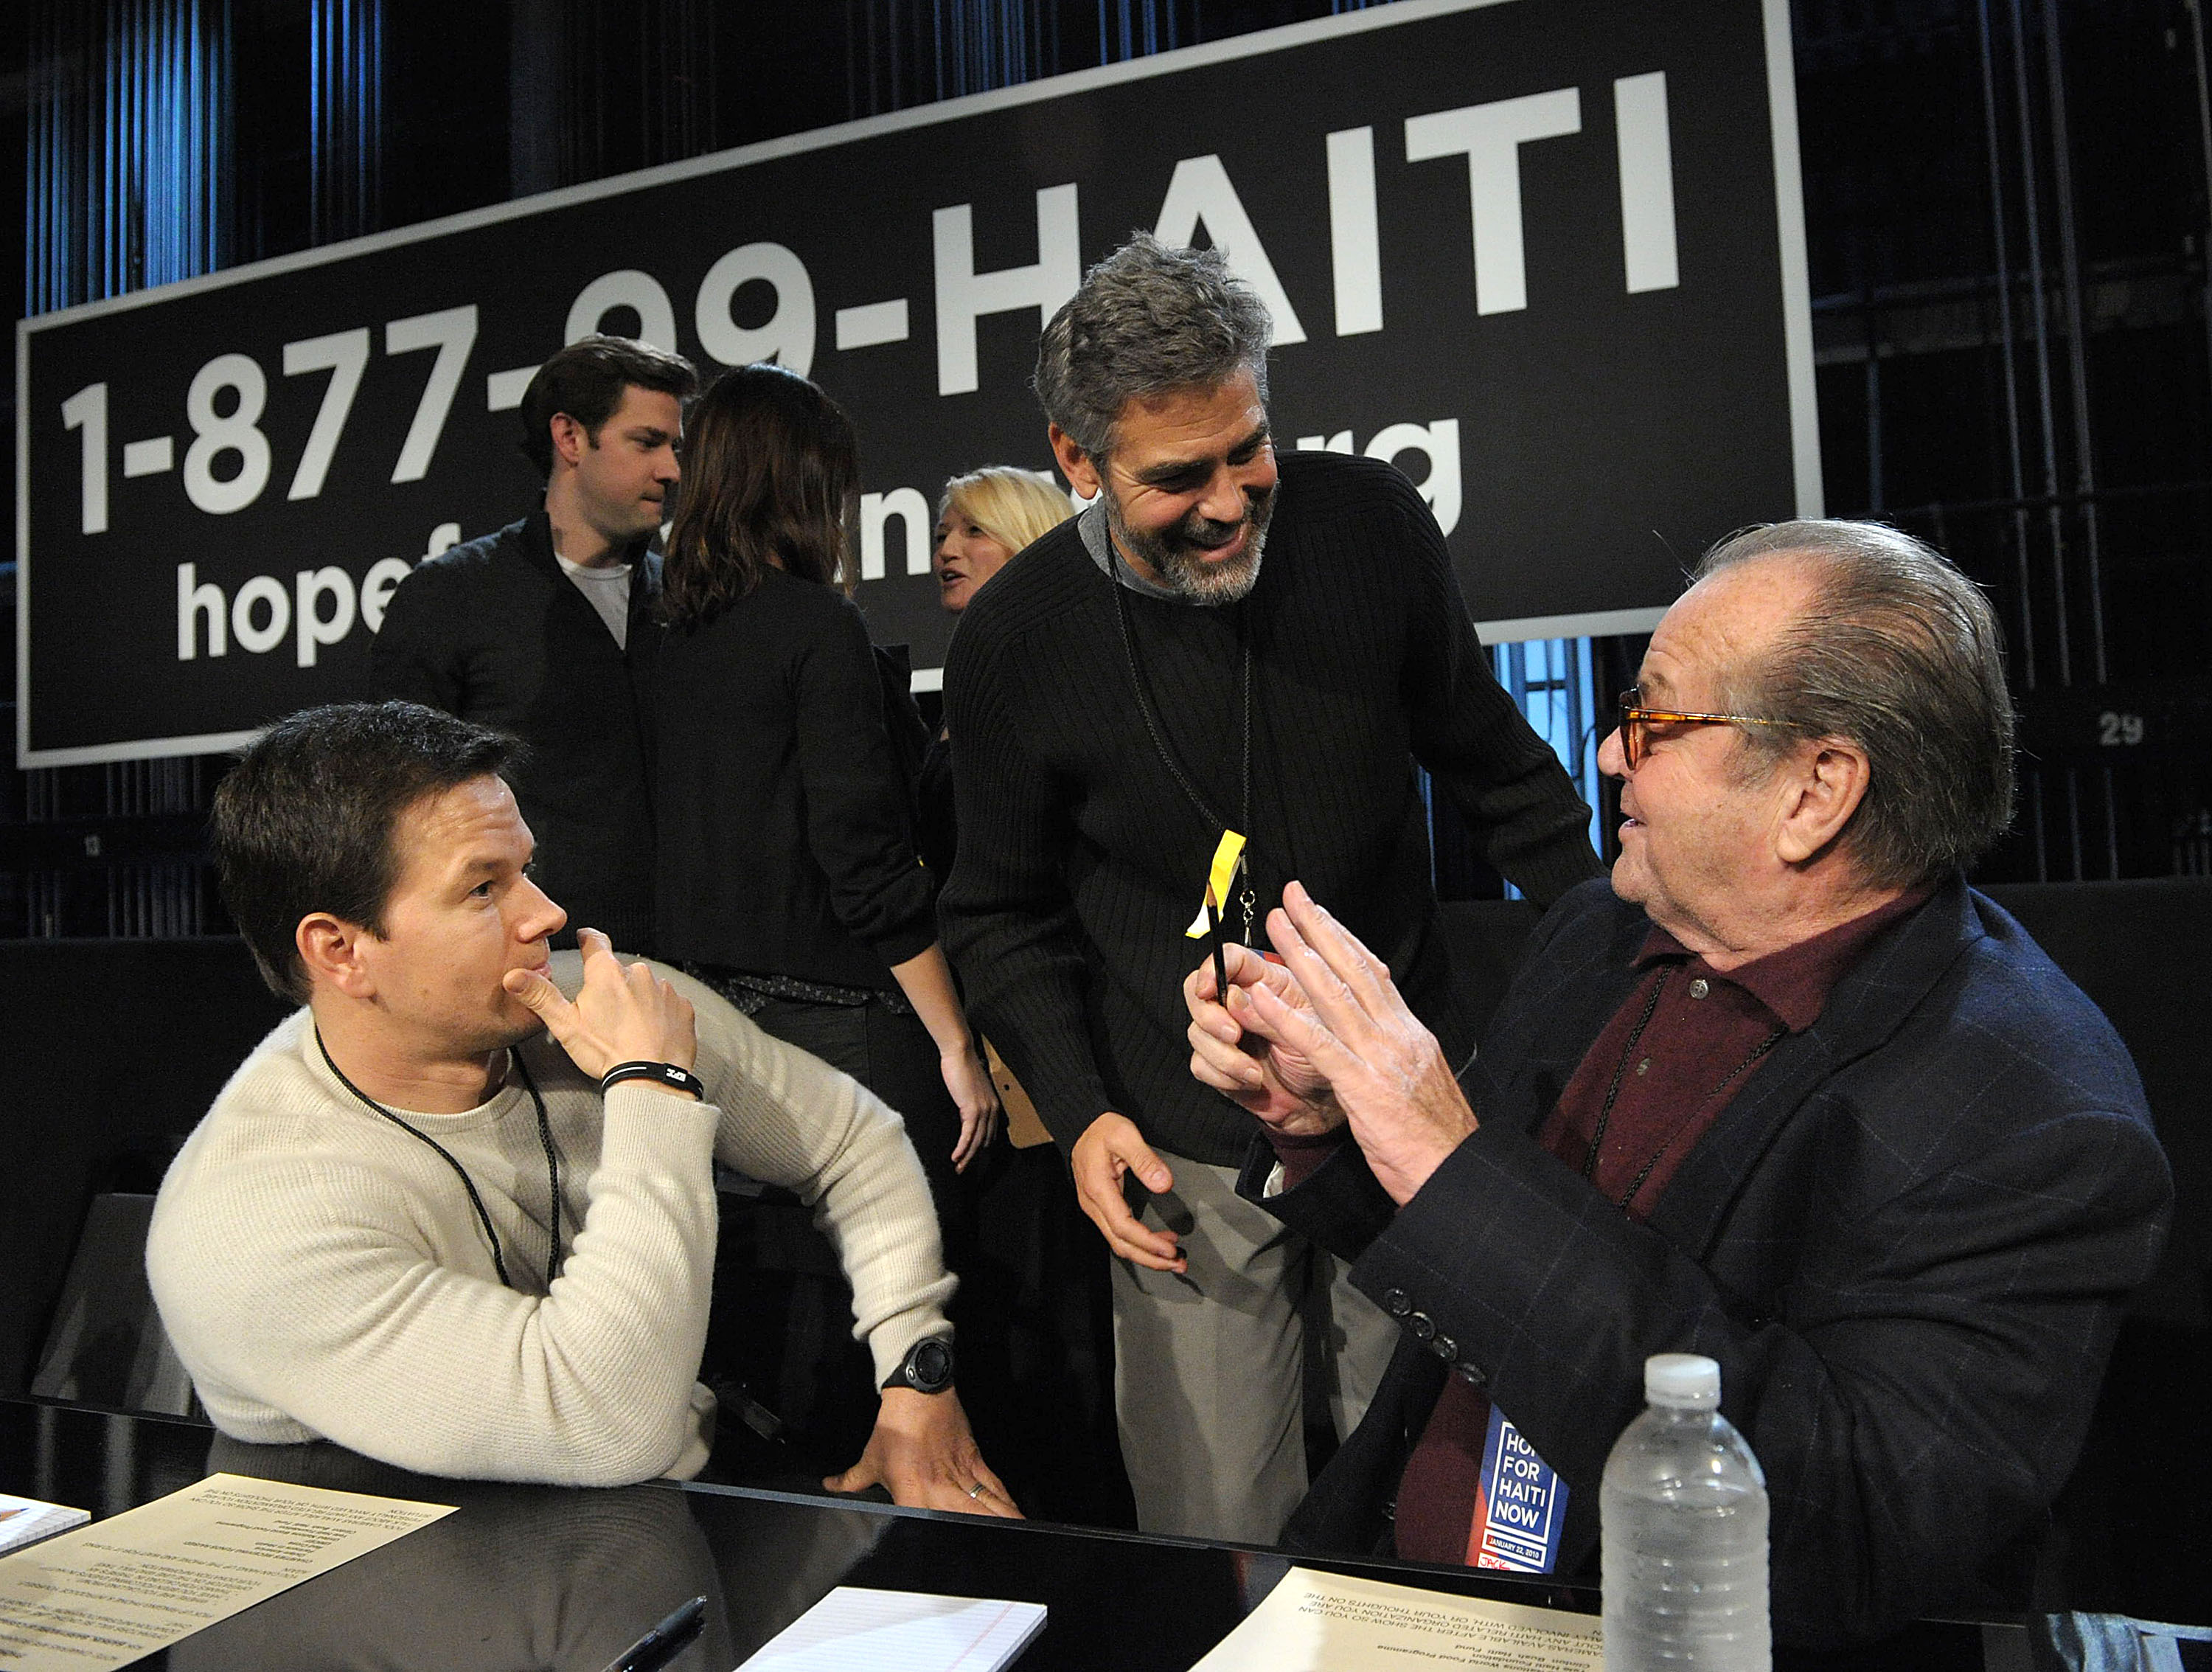 In this image released by Hope for Haiti Now, actors, from left, Mark Wahlberg, George Clooney, and Jack Nicholson are shown at "Hope for Haiti Now: A Global Benefit for Earthquake Relief", on Friday, Jan. 22, 2010, in Los Angeles. (AP Photo/Mark Davis, Hope for Haiti Now)